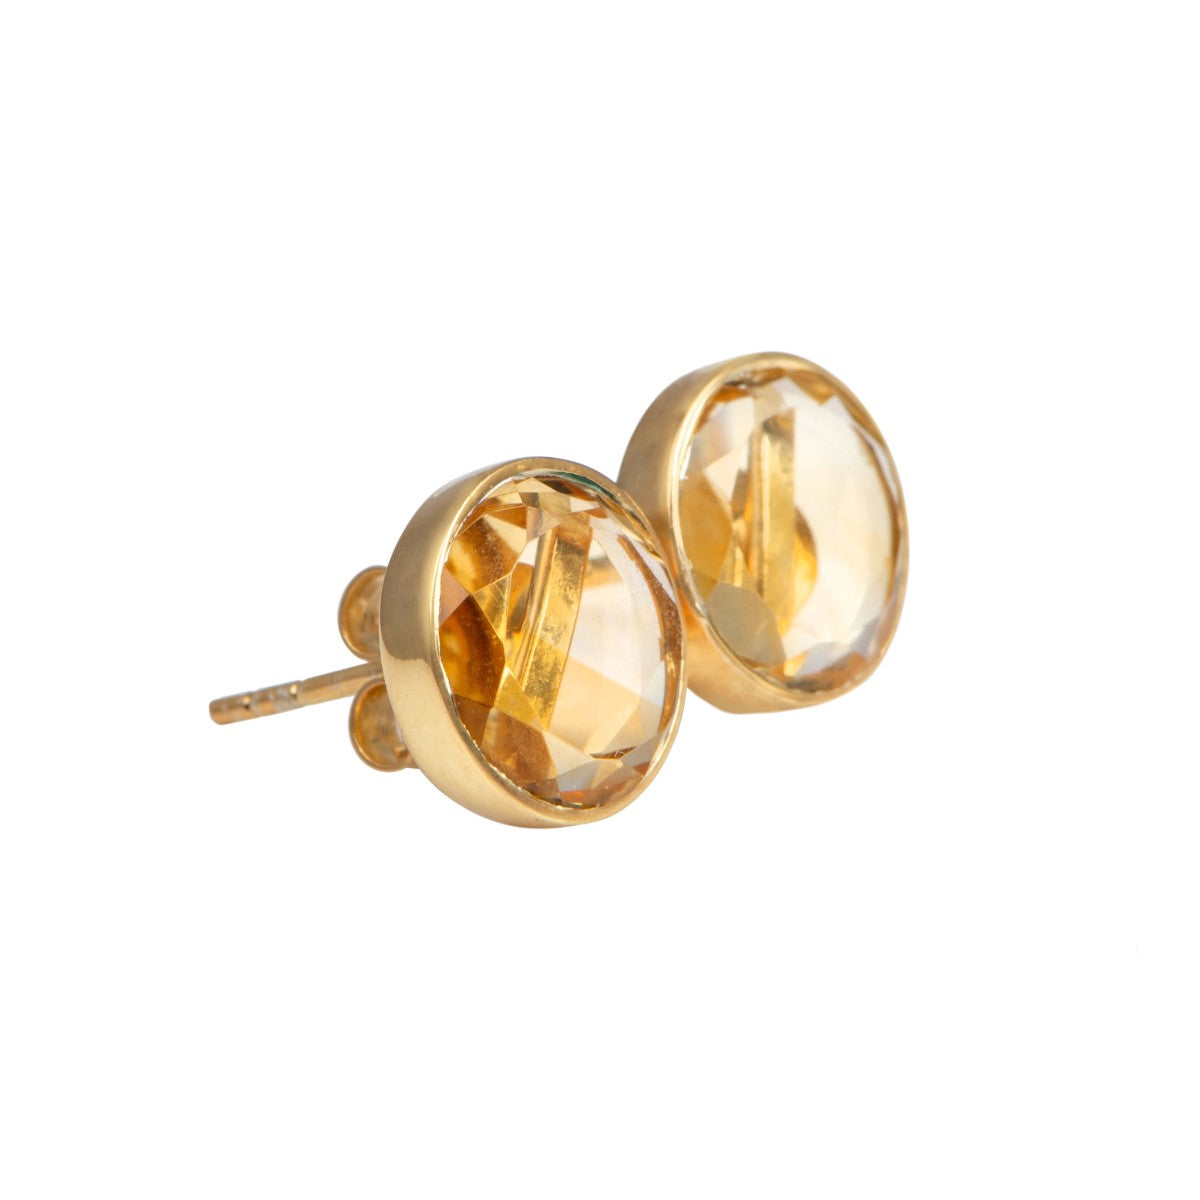 Citrine Studs in Gold Plated Sterling Silver with a Round Faceted Gemstone